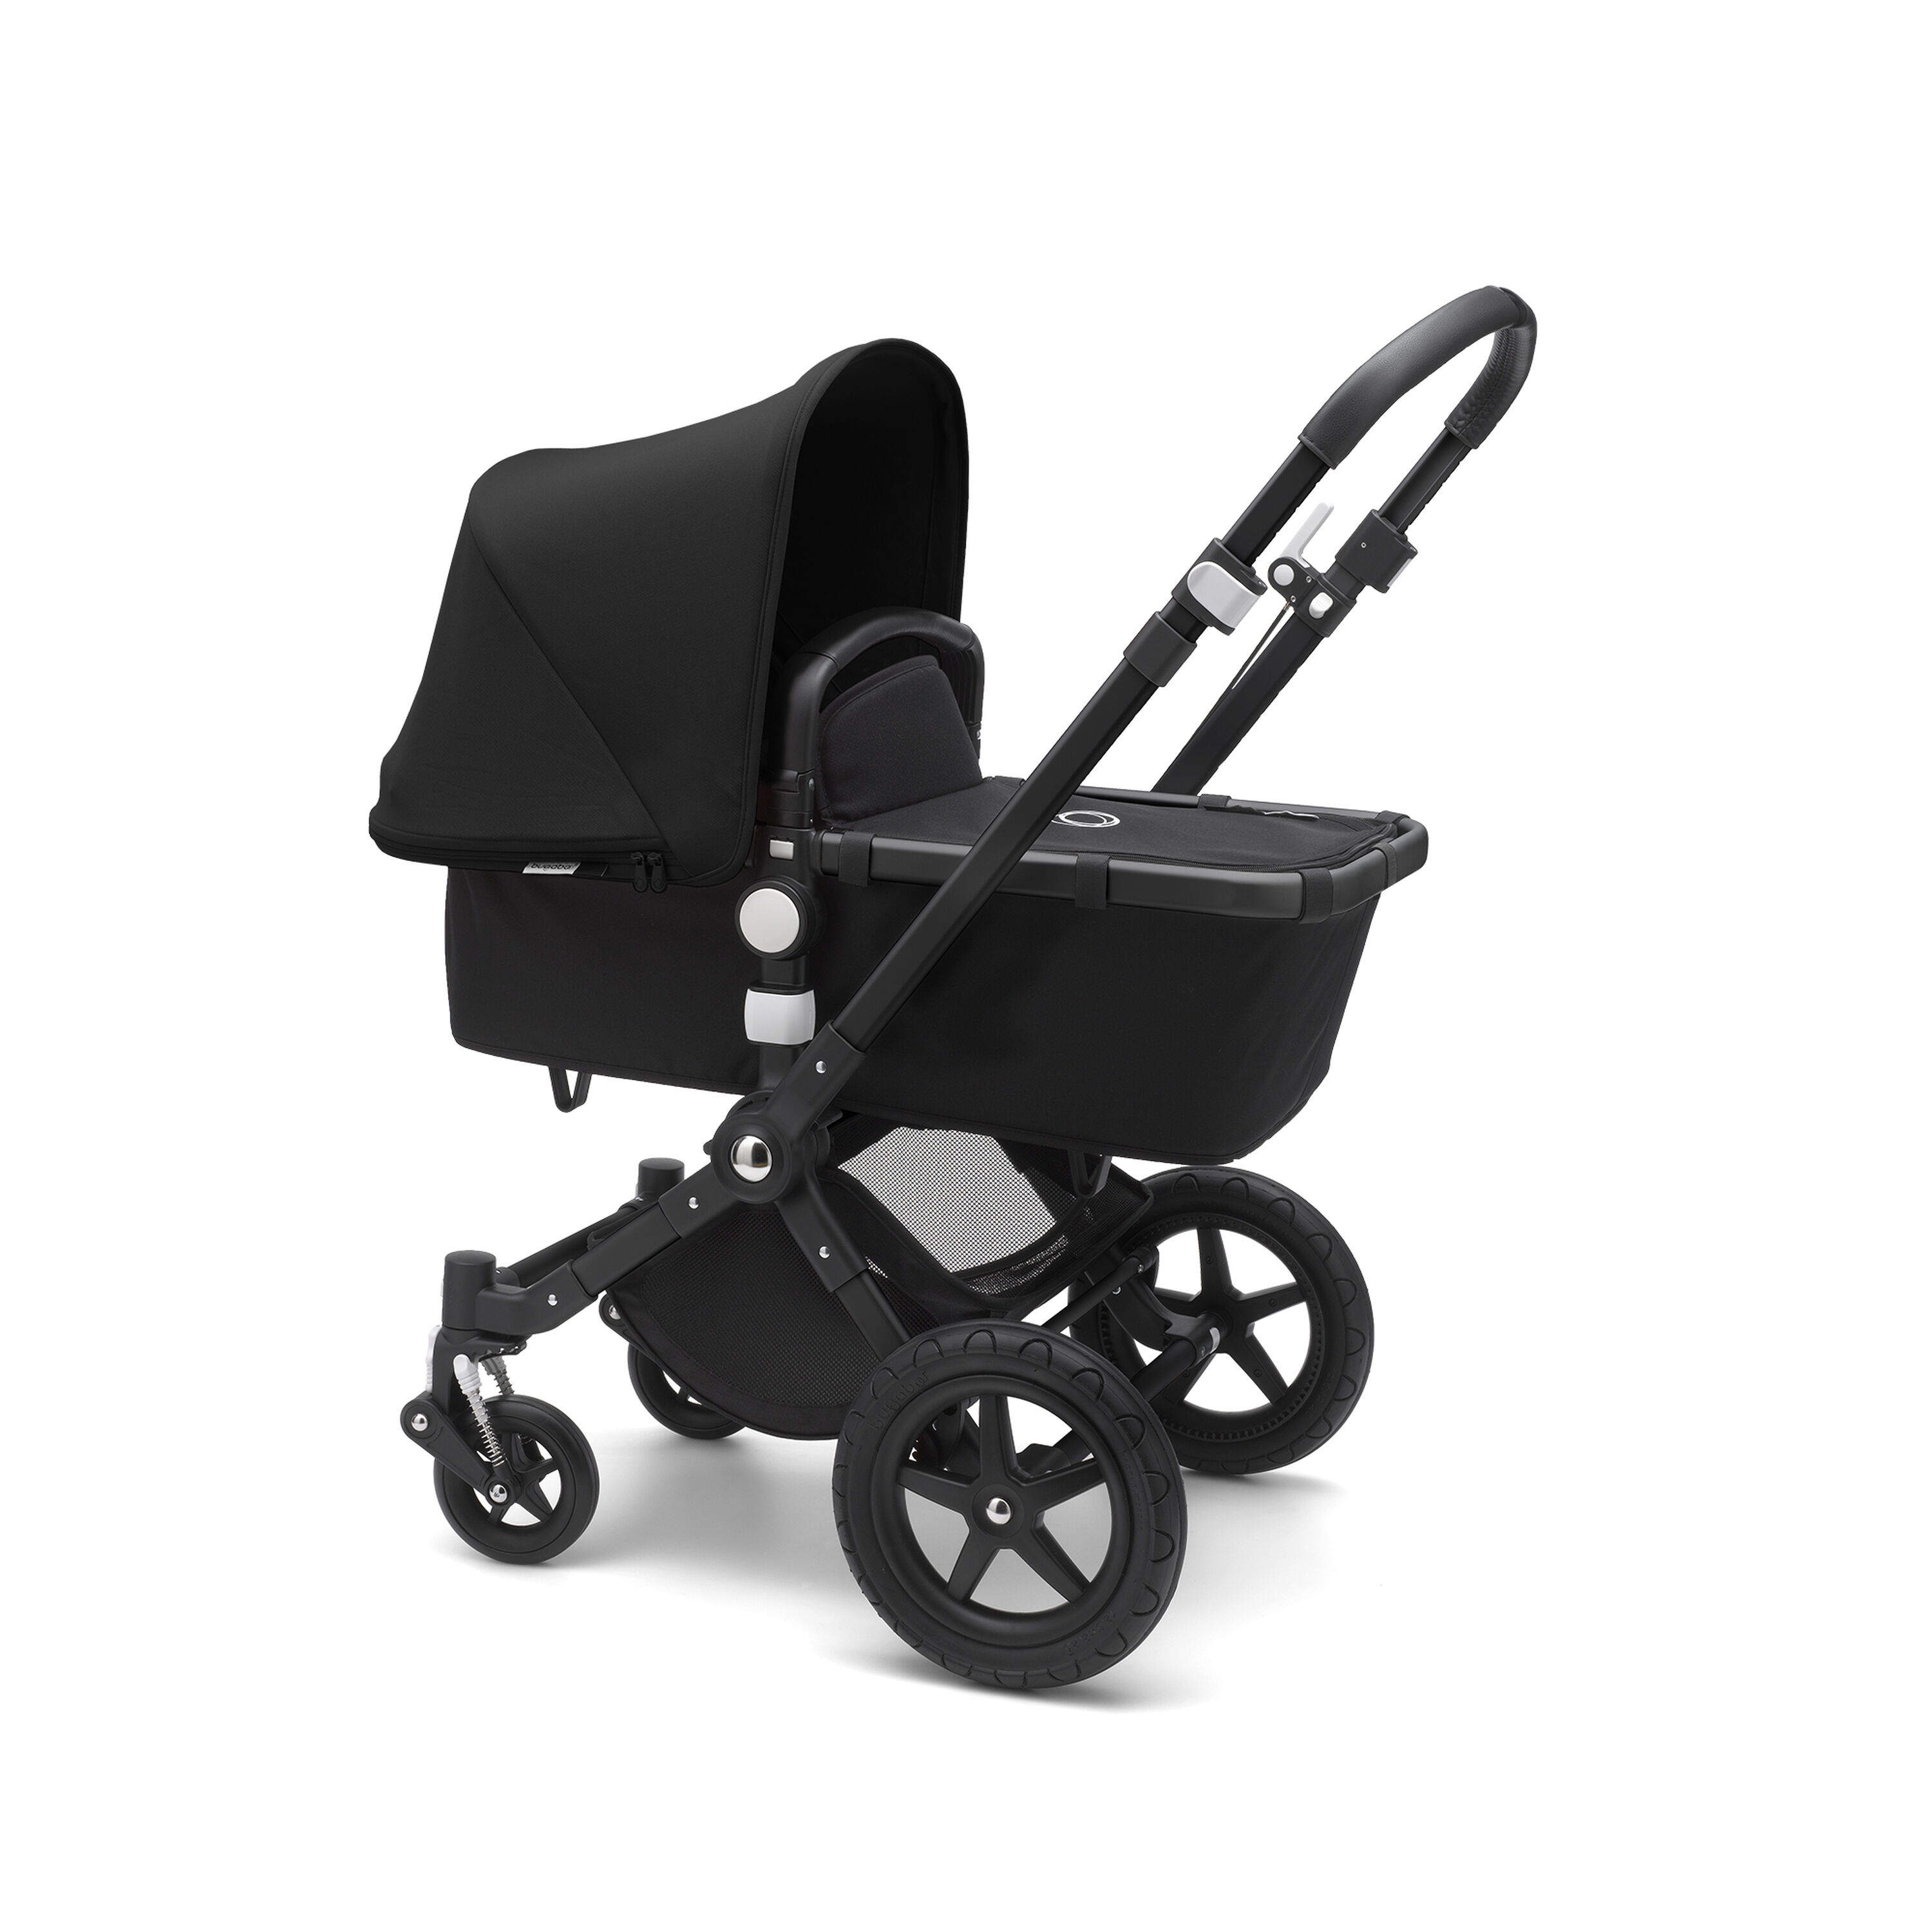 Bugaboo Cameleon 3 Plus seat and carrycot pushchair Black sun